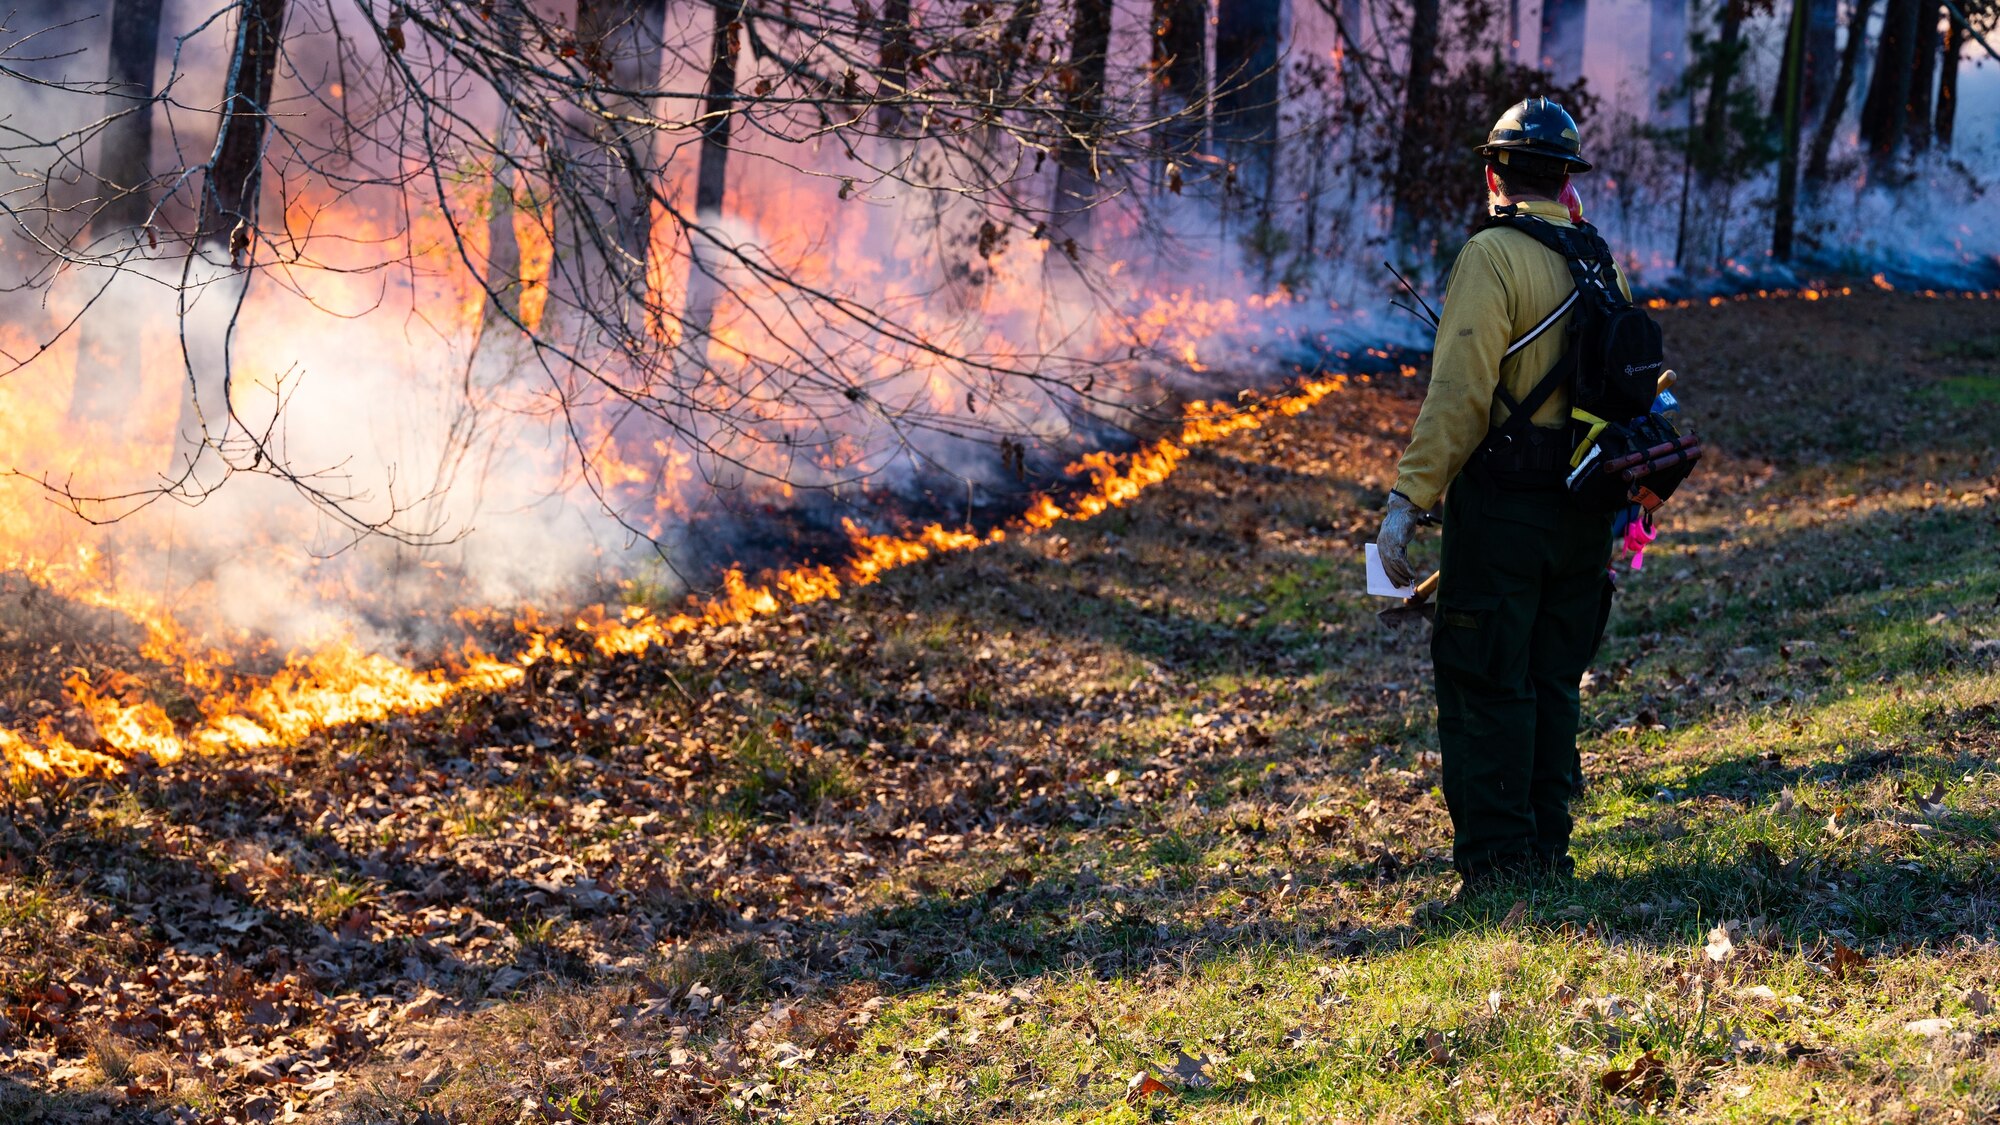 Matt Johnson, U.S. Fish and Wildlife fire management specialist, scans the perimeter of a controlled burn at Barksdale Air Force Base, Louisiana, Jan. 28, 2022.